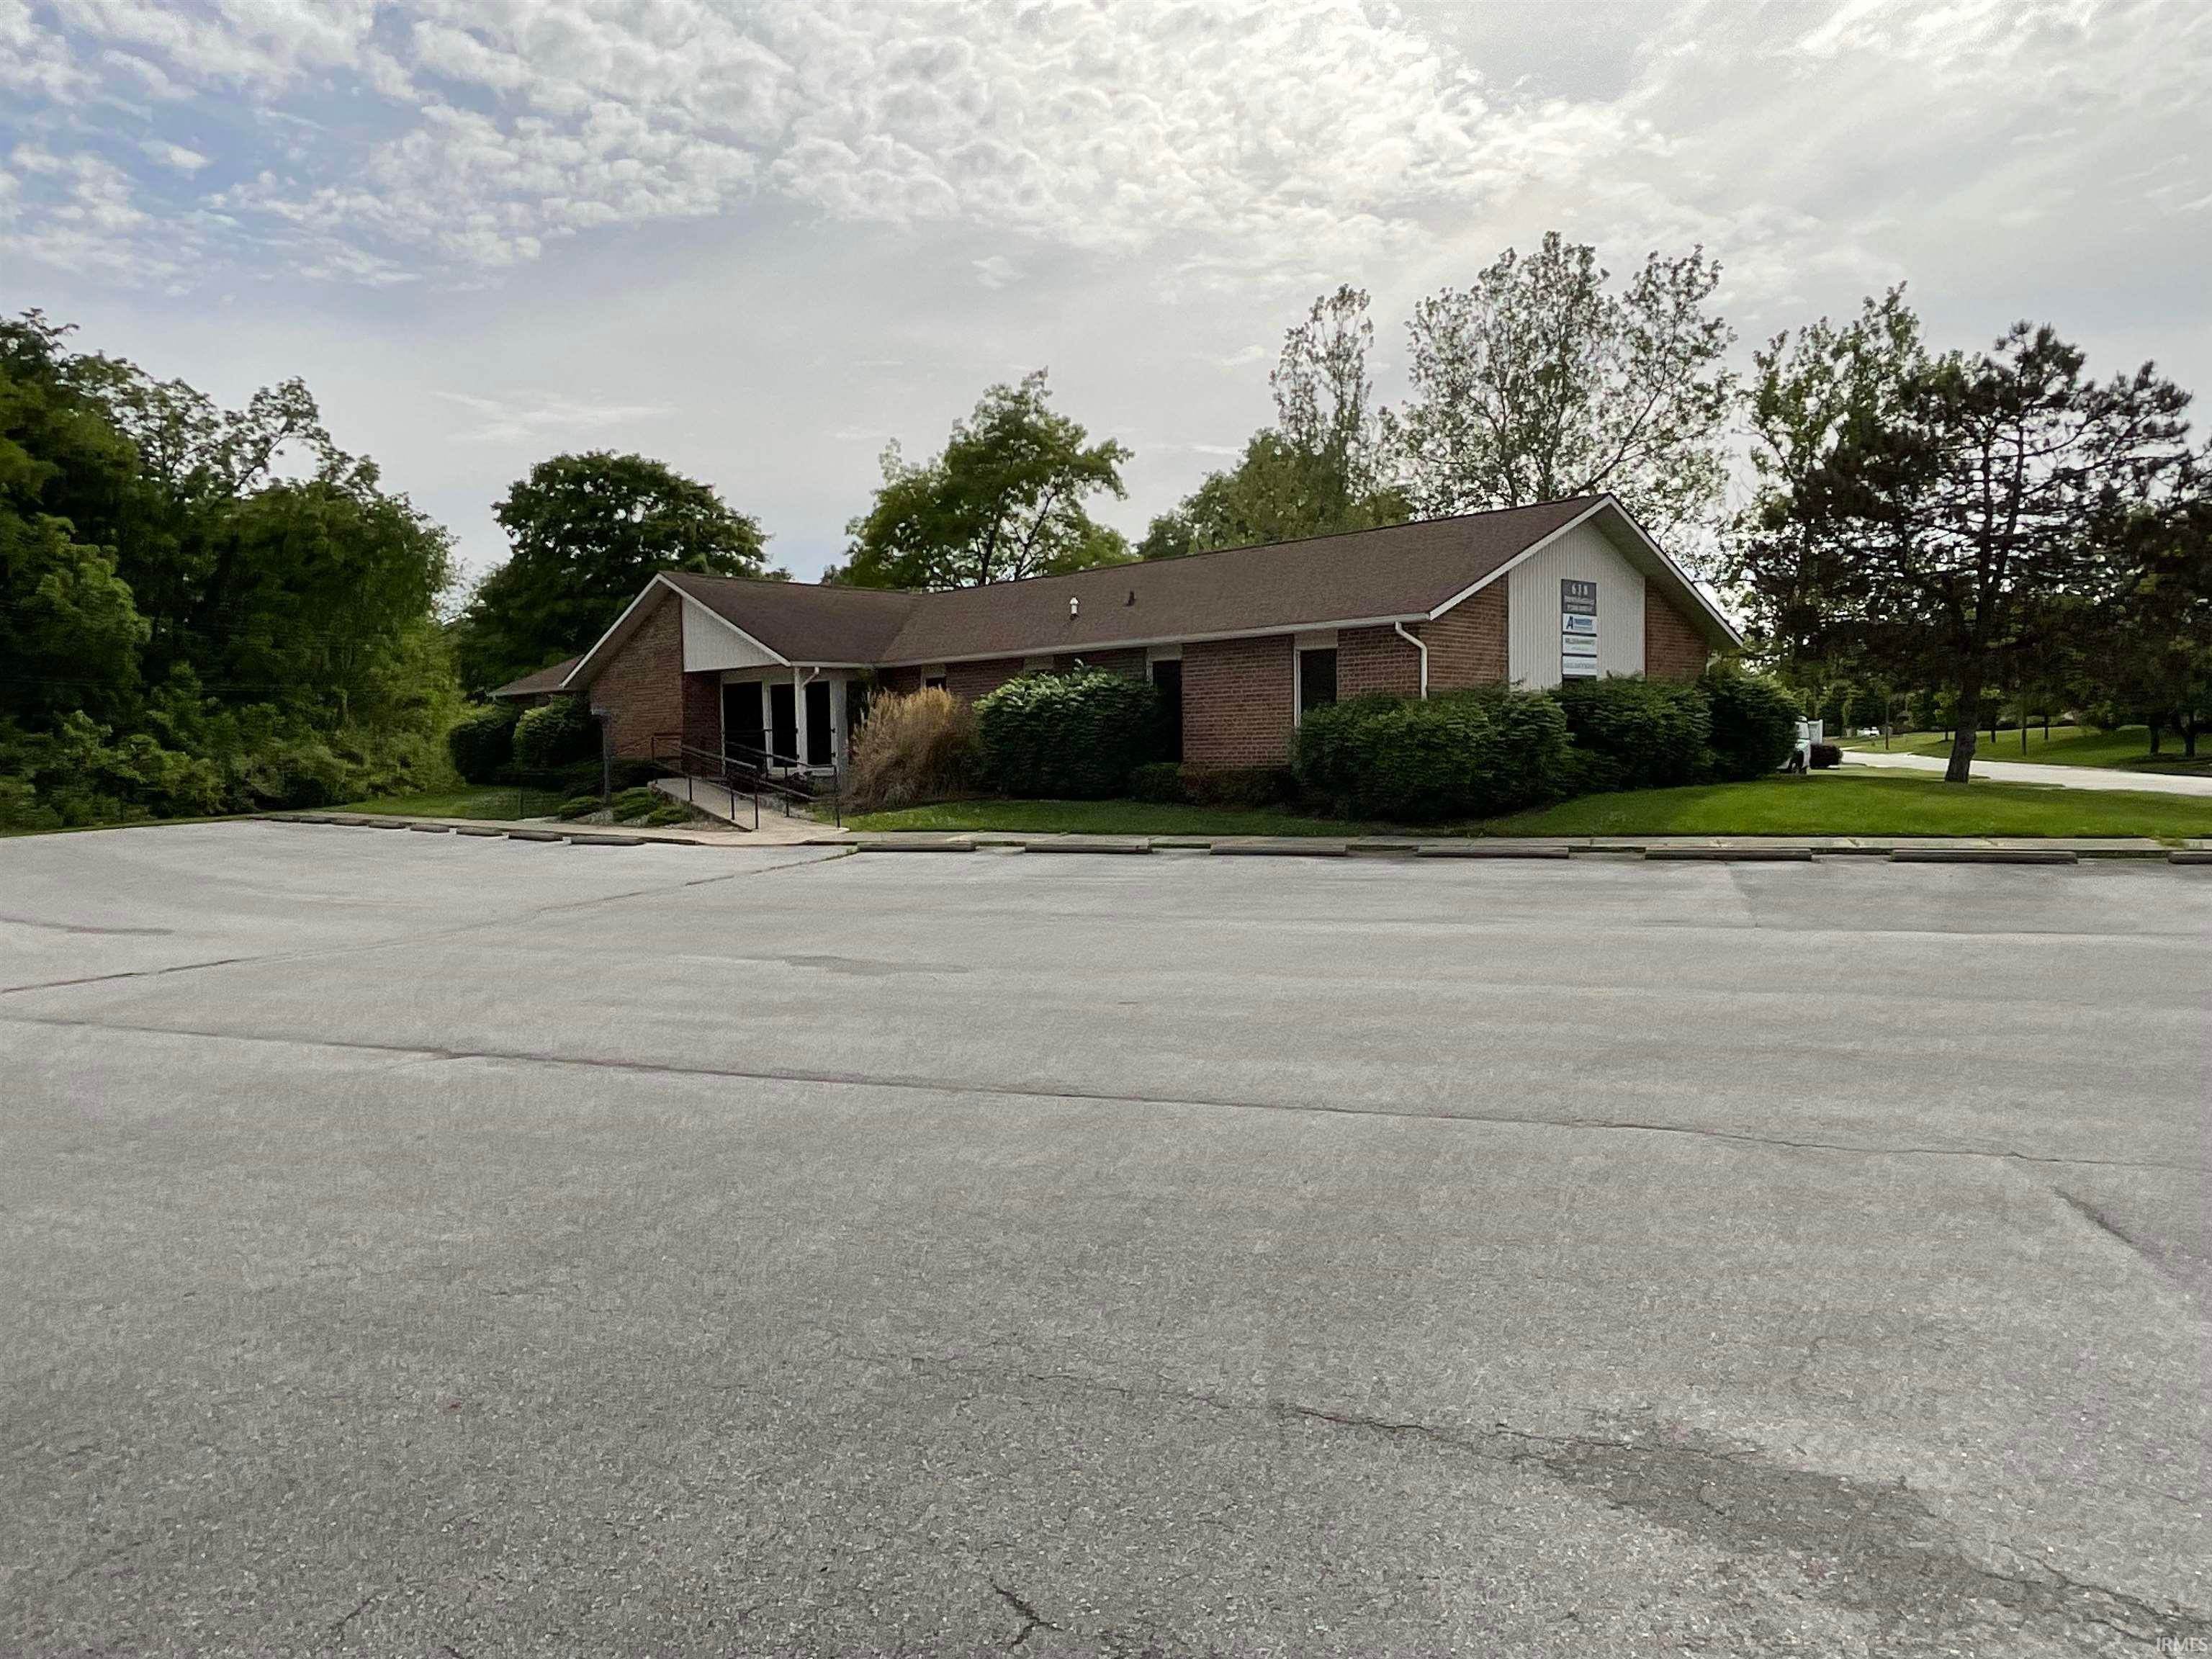 Comm / Ind Lease at 618 Professional Park Drive New Haven, Indiana 46774 United States